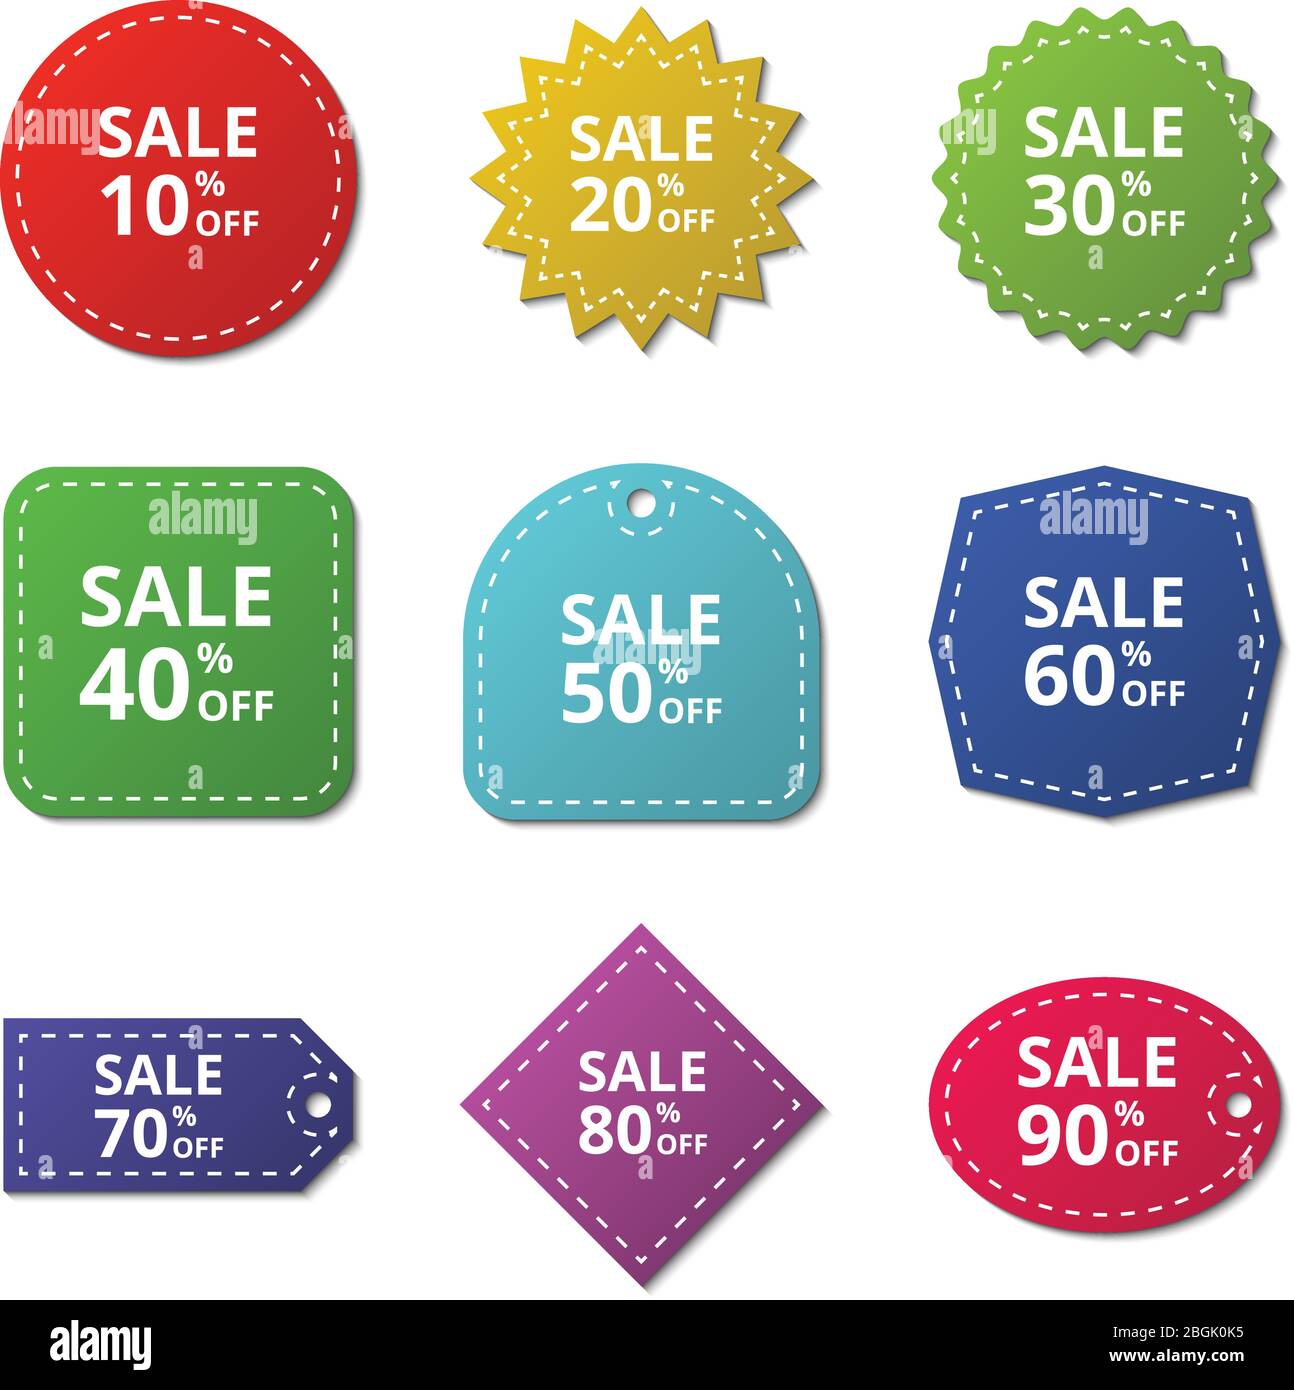 Discount stickers. Special price offer sale labels. Merchandise vector tags. Illustration of discount tag price, merchandise sticker promotion sale Stock Vector